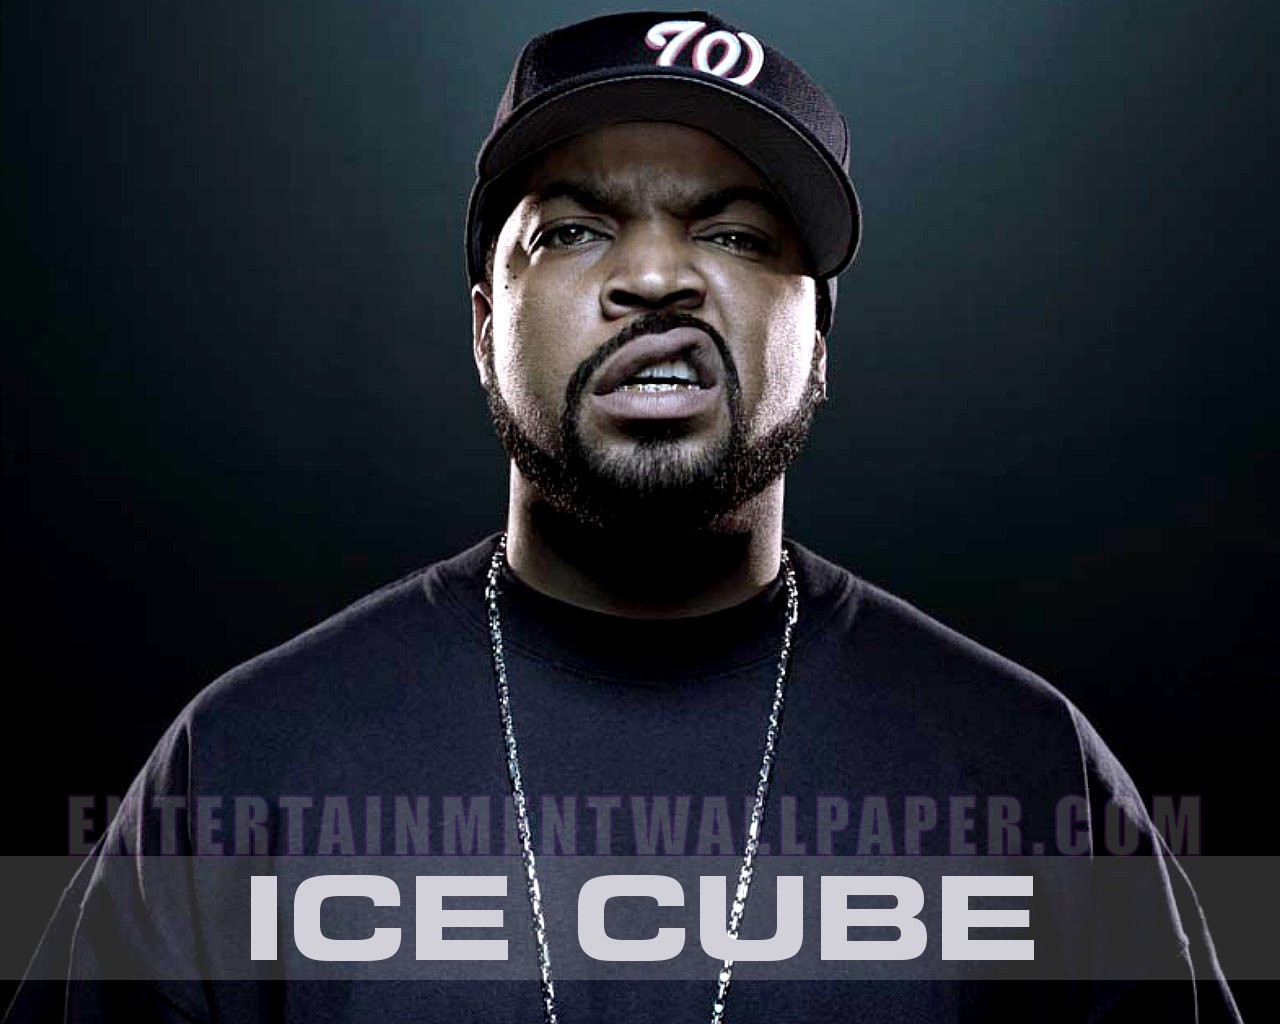 ice cube wallpaper,music,facial hair,cool,rapper,rapping